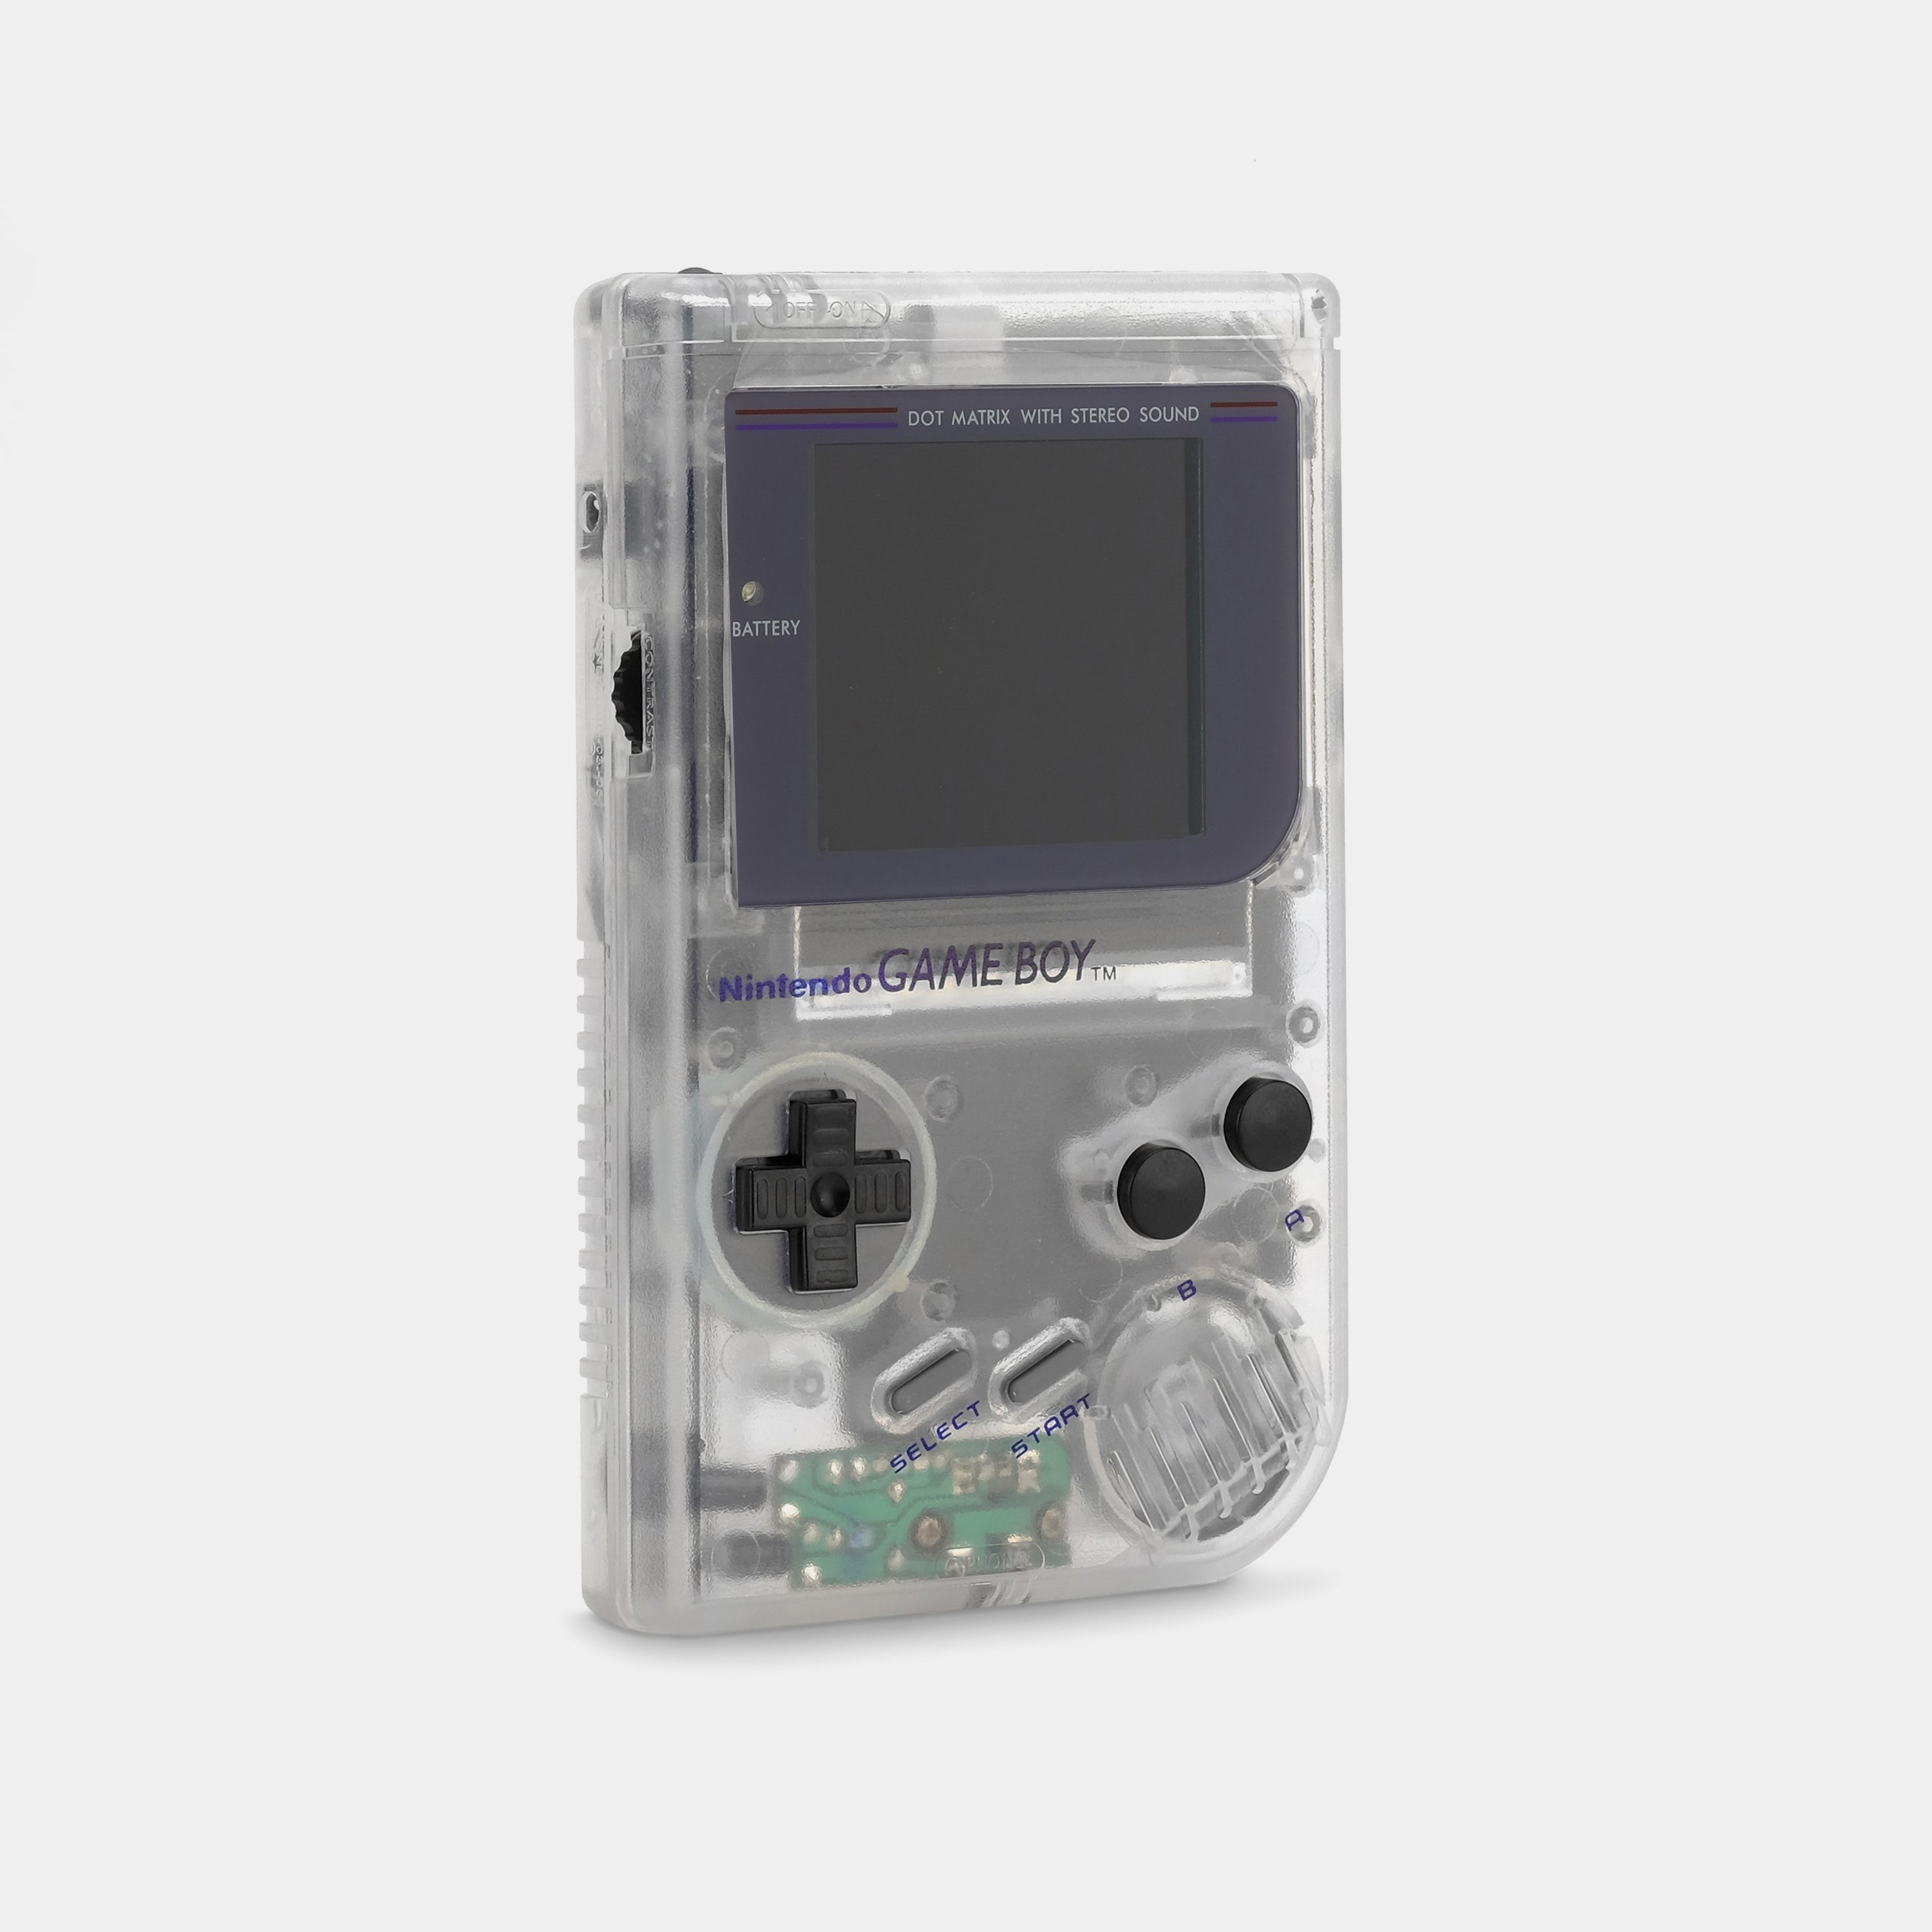 Nintendo Game Boy Clear Game Console With Multicolor Backlight